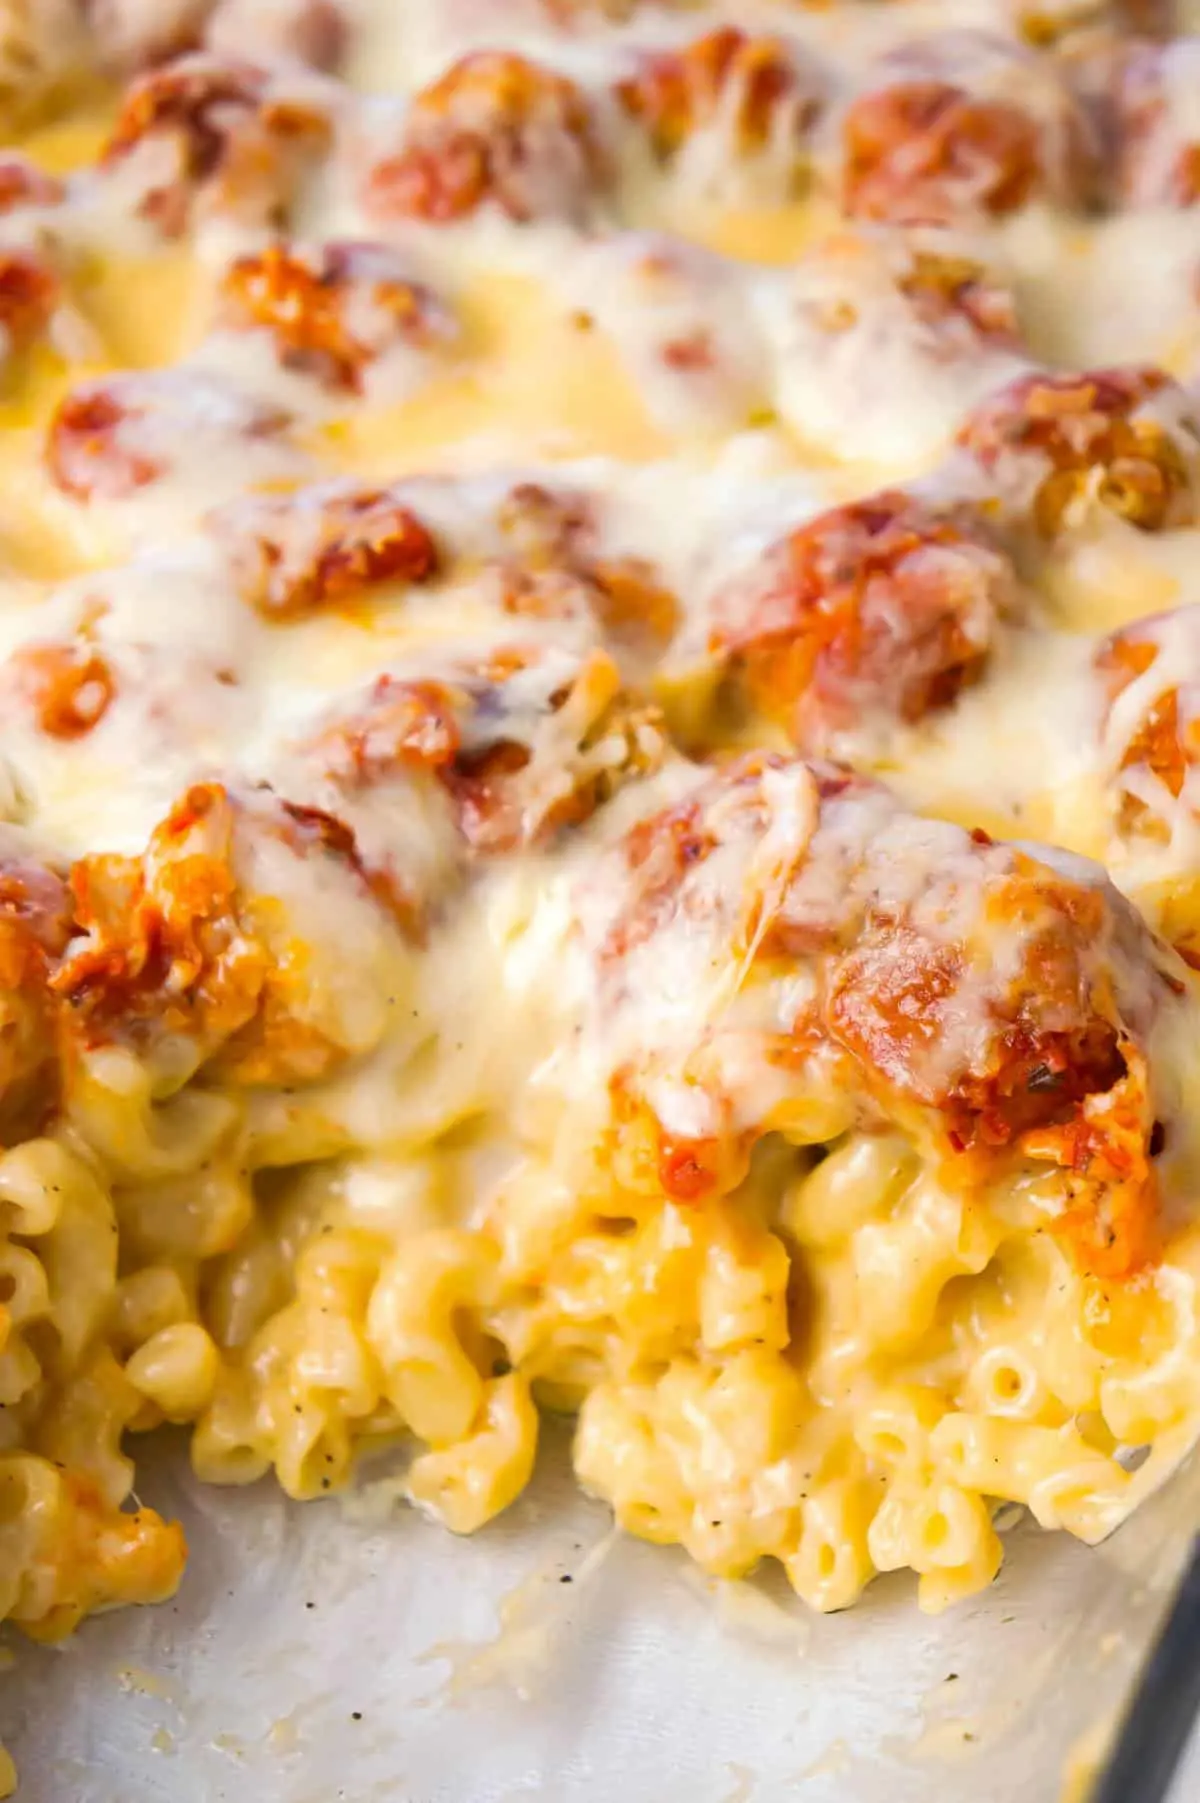 Chicken Parmesan Mac and Cheese is a hearty baked pasta recipe with a base of macaroni and cheese topped with popcorn chicken, marinara sauce and mozzarella cheese.